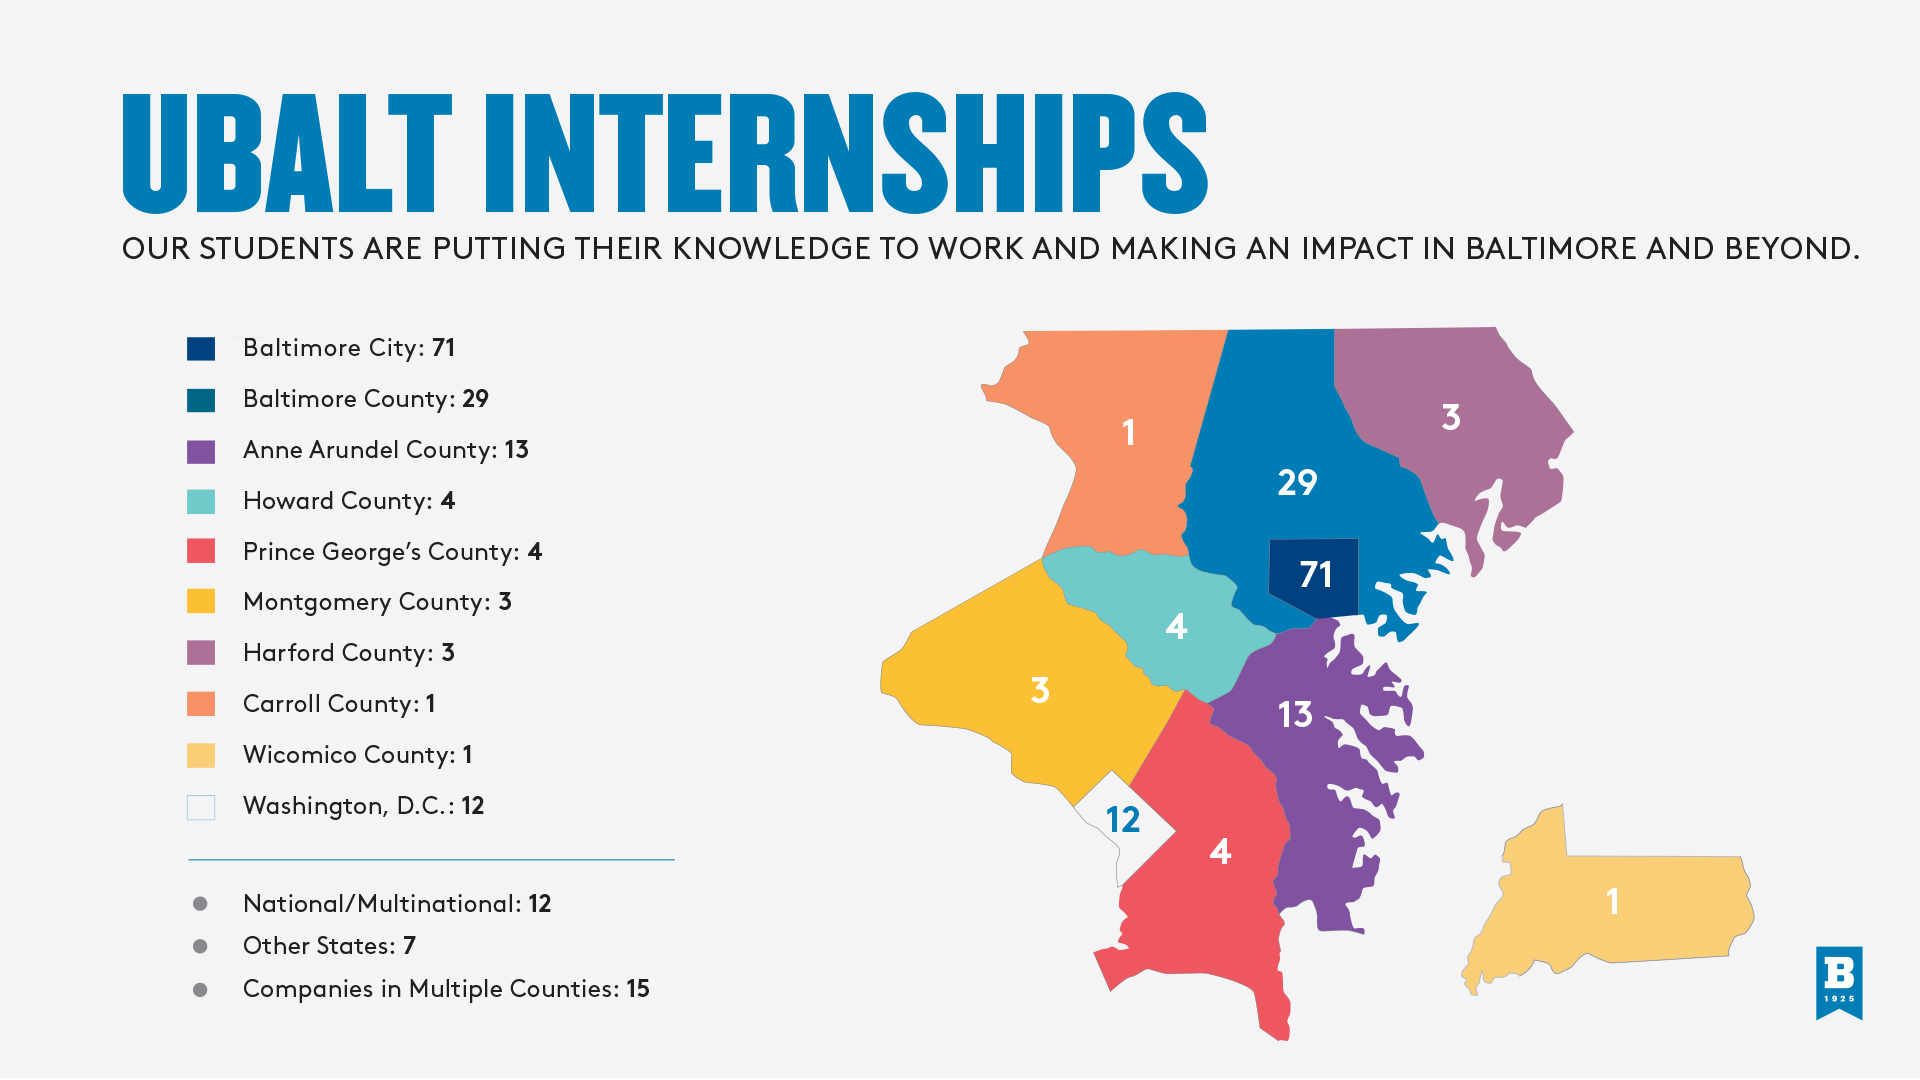 An internship map of Maryland counties showing the number of student interns in each county. 71 in Baltimore City, 29 in Baltimore County, 13 in Anne Arundel County, 4 each in Howard and Prince George's Counties, 3 each in Montgomery and Harford Counties, 1 each in Carroll and Wicomico Counties, 12 in Washington D.C., 12 nationally/multinationally, and 7 in other states. 15 companies are in multiple counties.